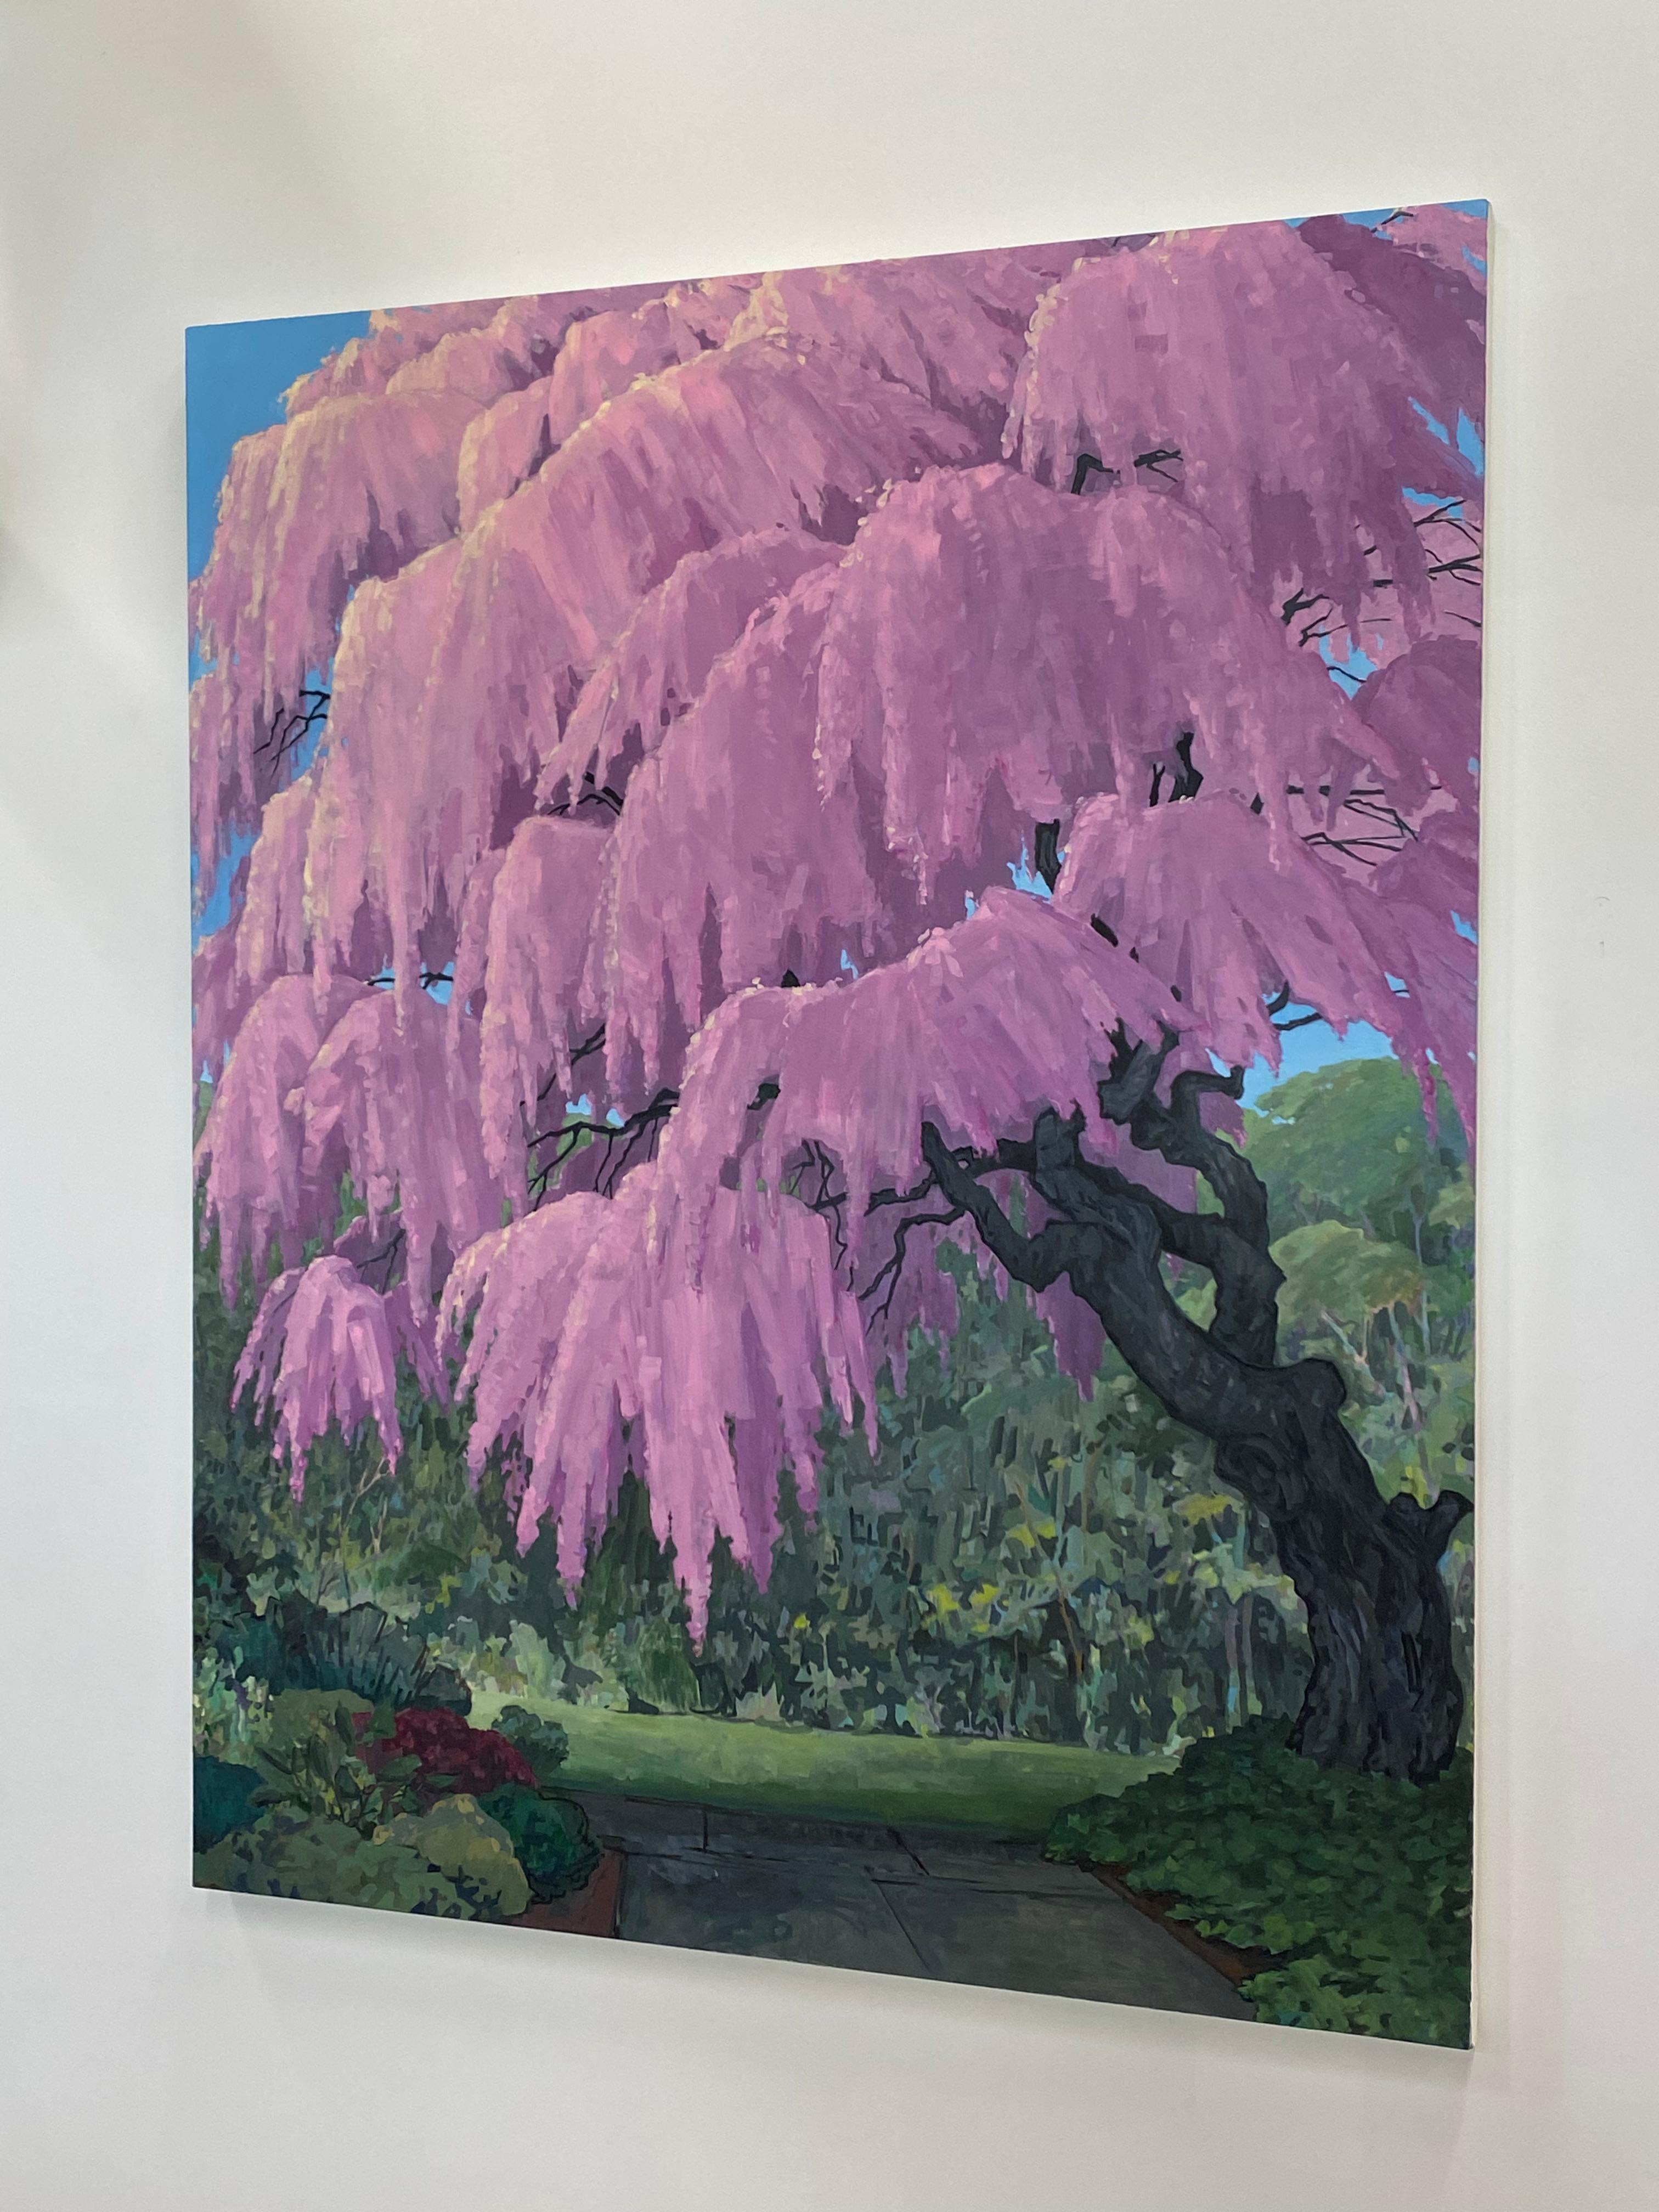 Weeping Cherry, Cherry Blossom Tree, Pink, Blue Sky, Green Park Landscape For Sale 7